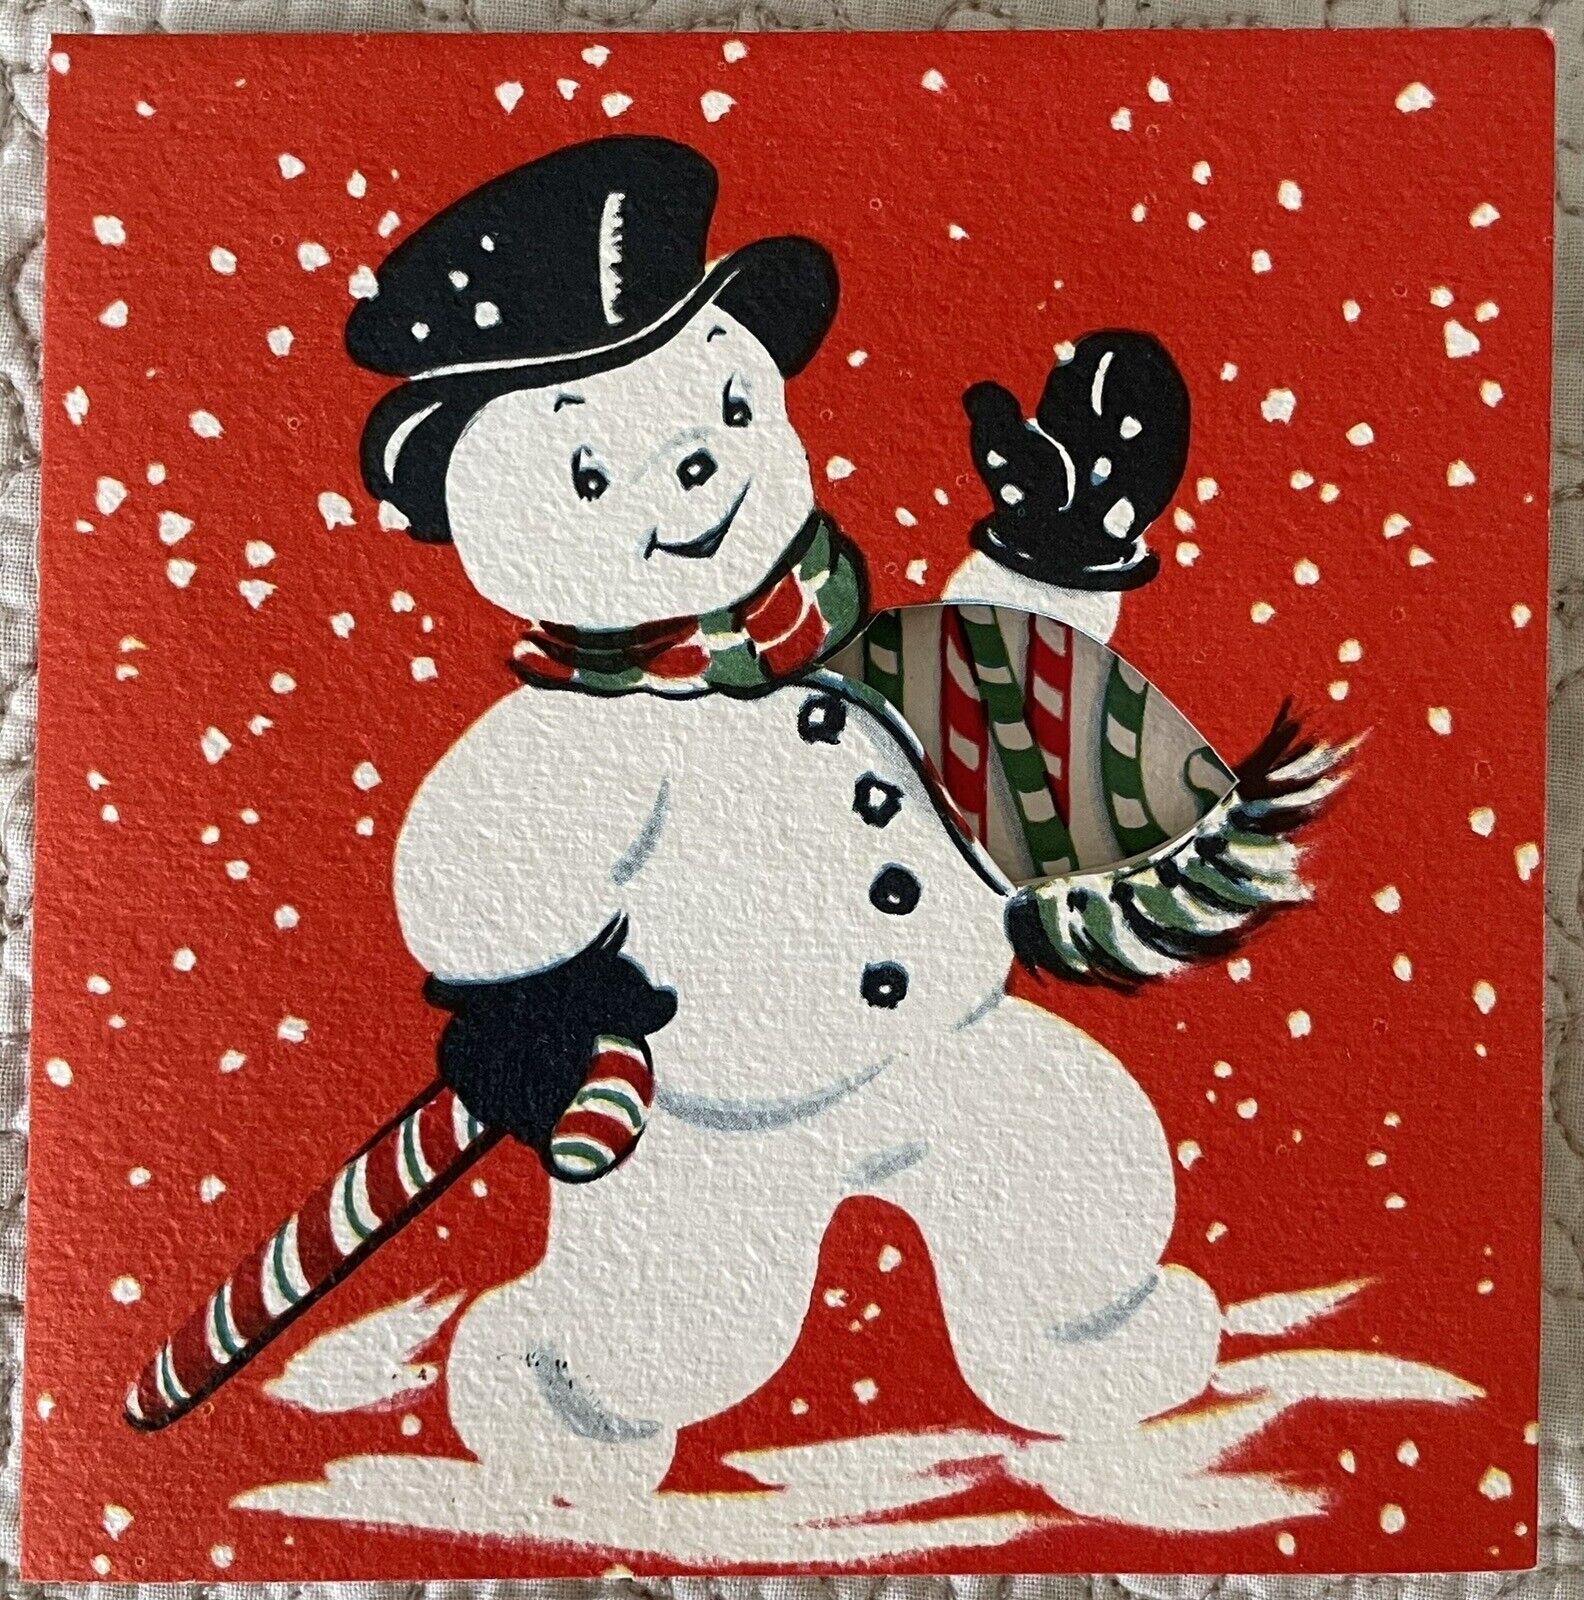 Unused Christmas Snowman Black Hat Candy Cane Gloves Greeting Card 1950s 1960s